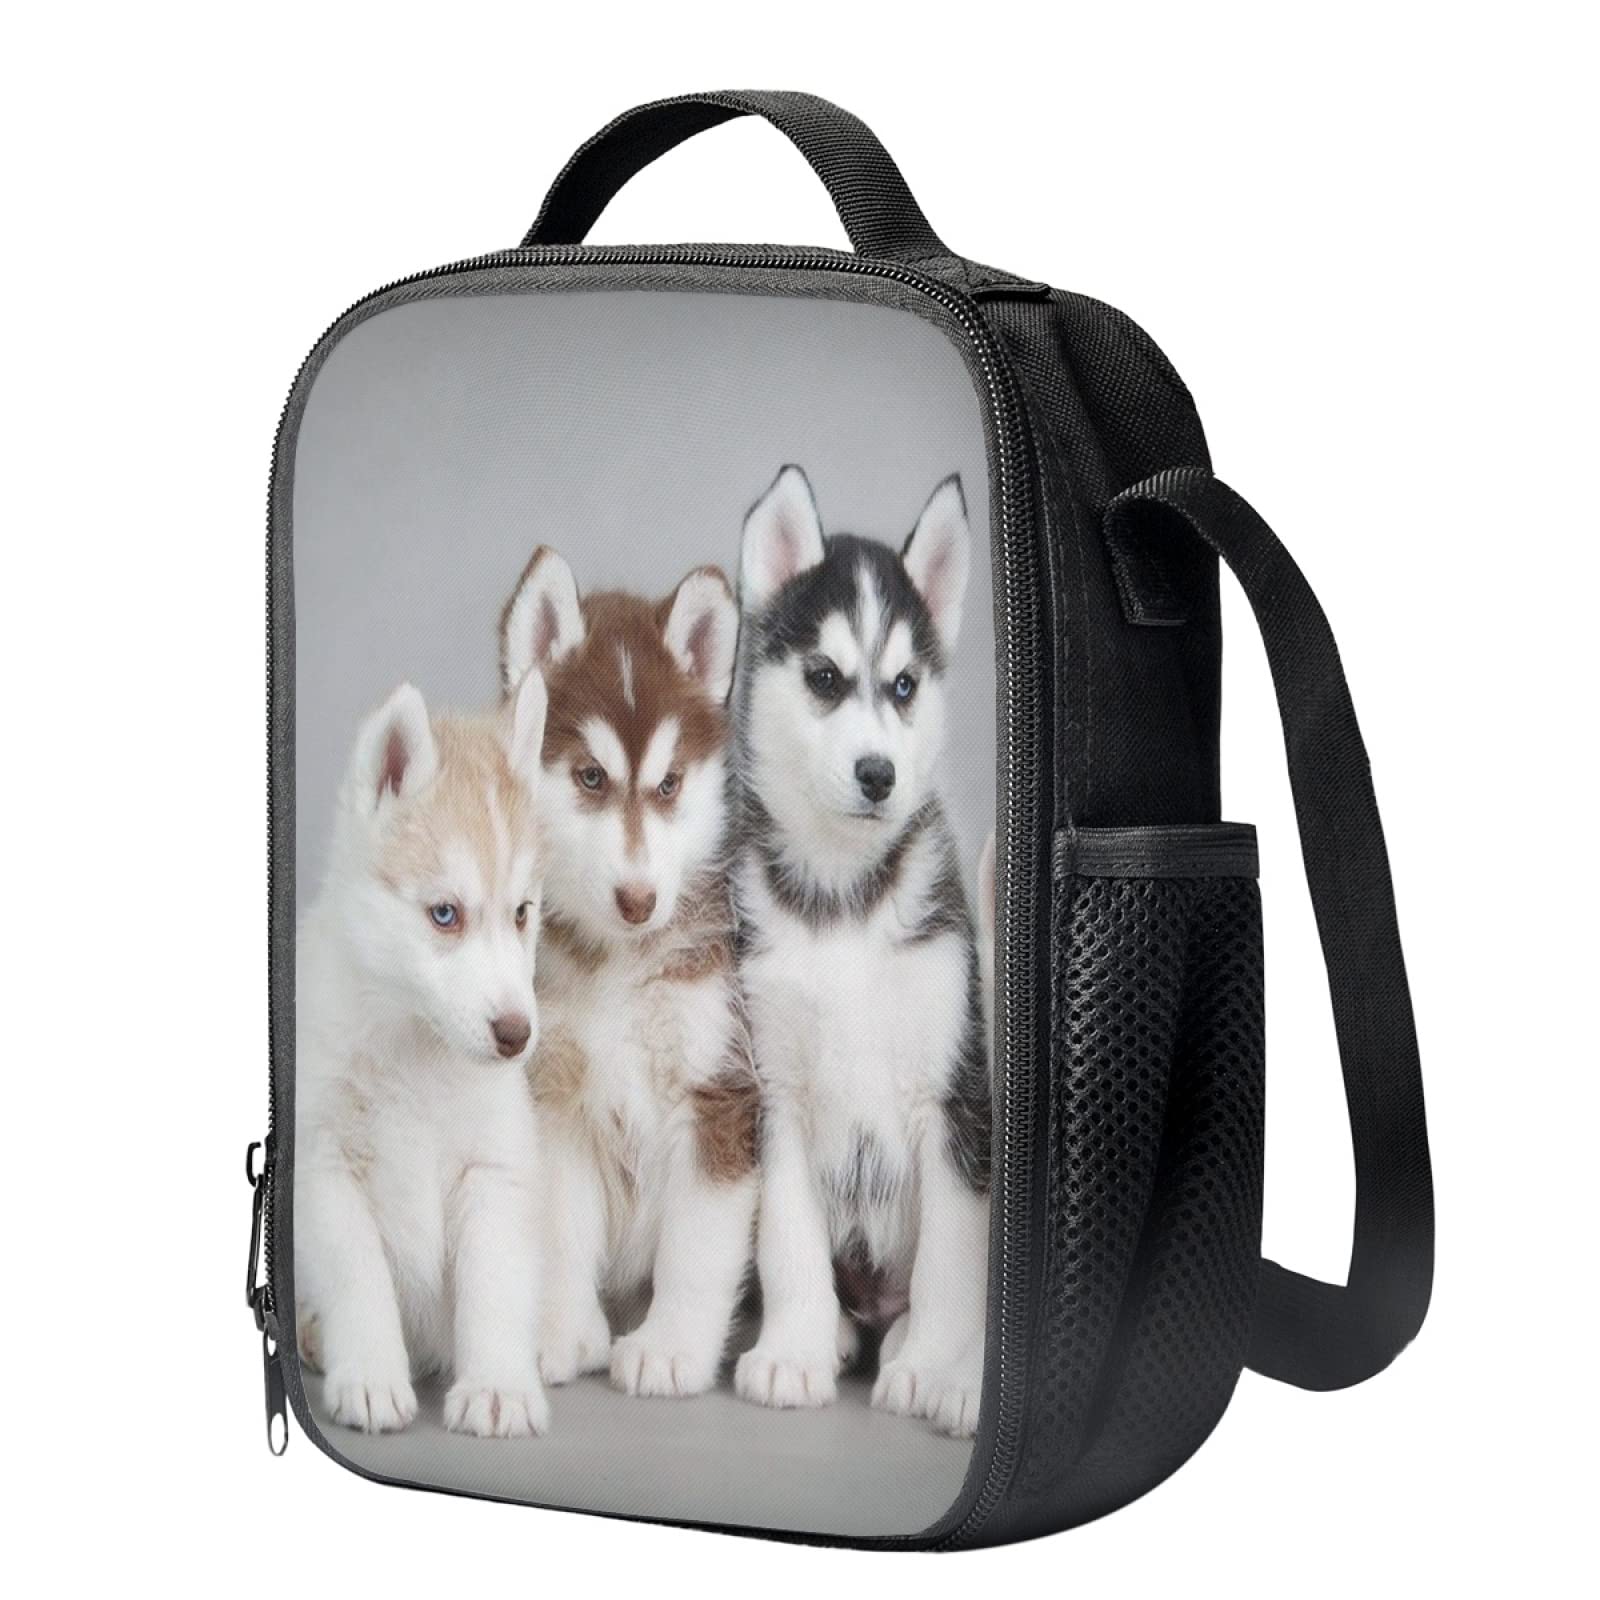 Sannovo Cute Husky Puppy Lunch Bag Box Tote Insulated Washable School Cooler Bag